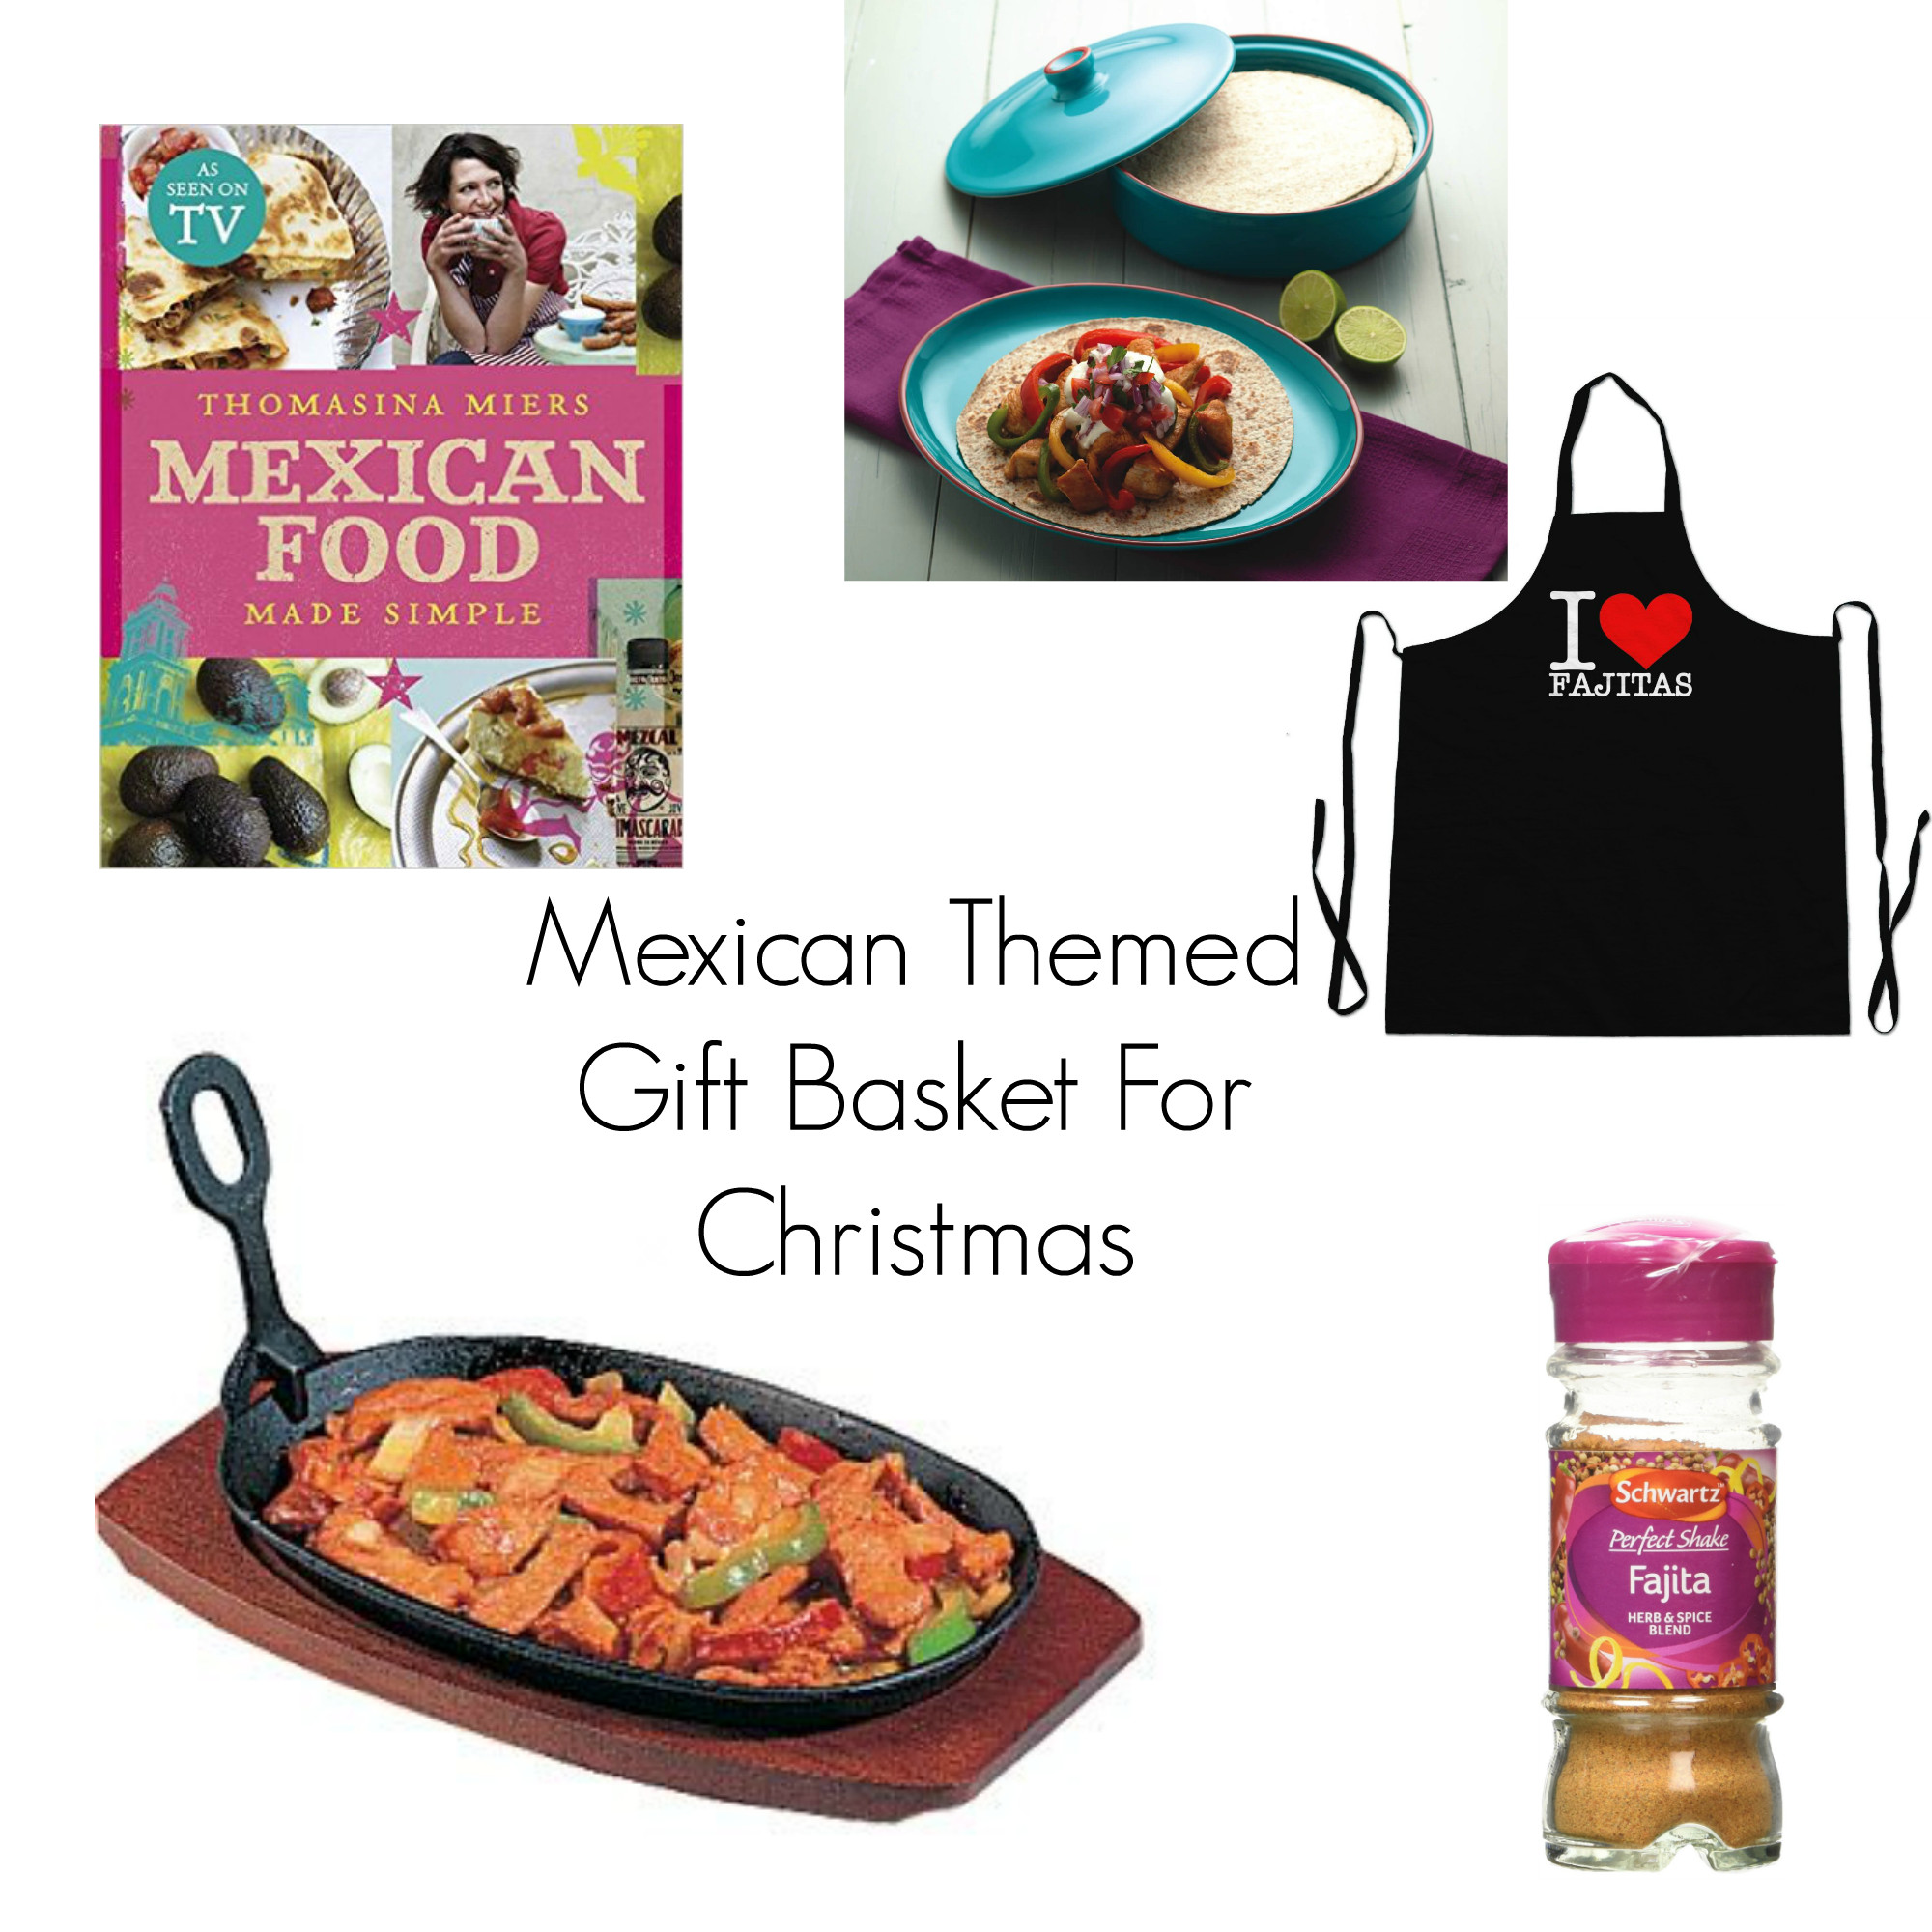 The 22 Best Ideas for Mexican themed Gift Basket Ideas - Home, Family